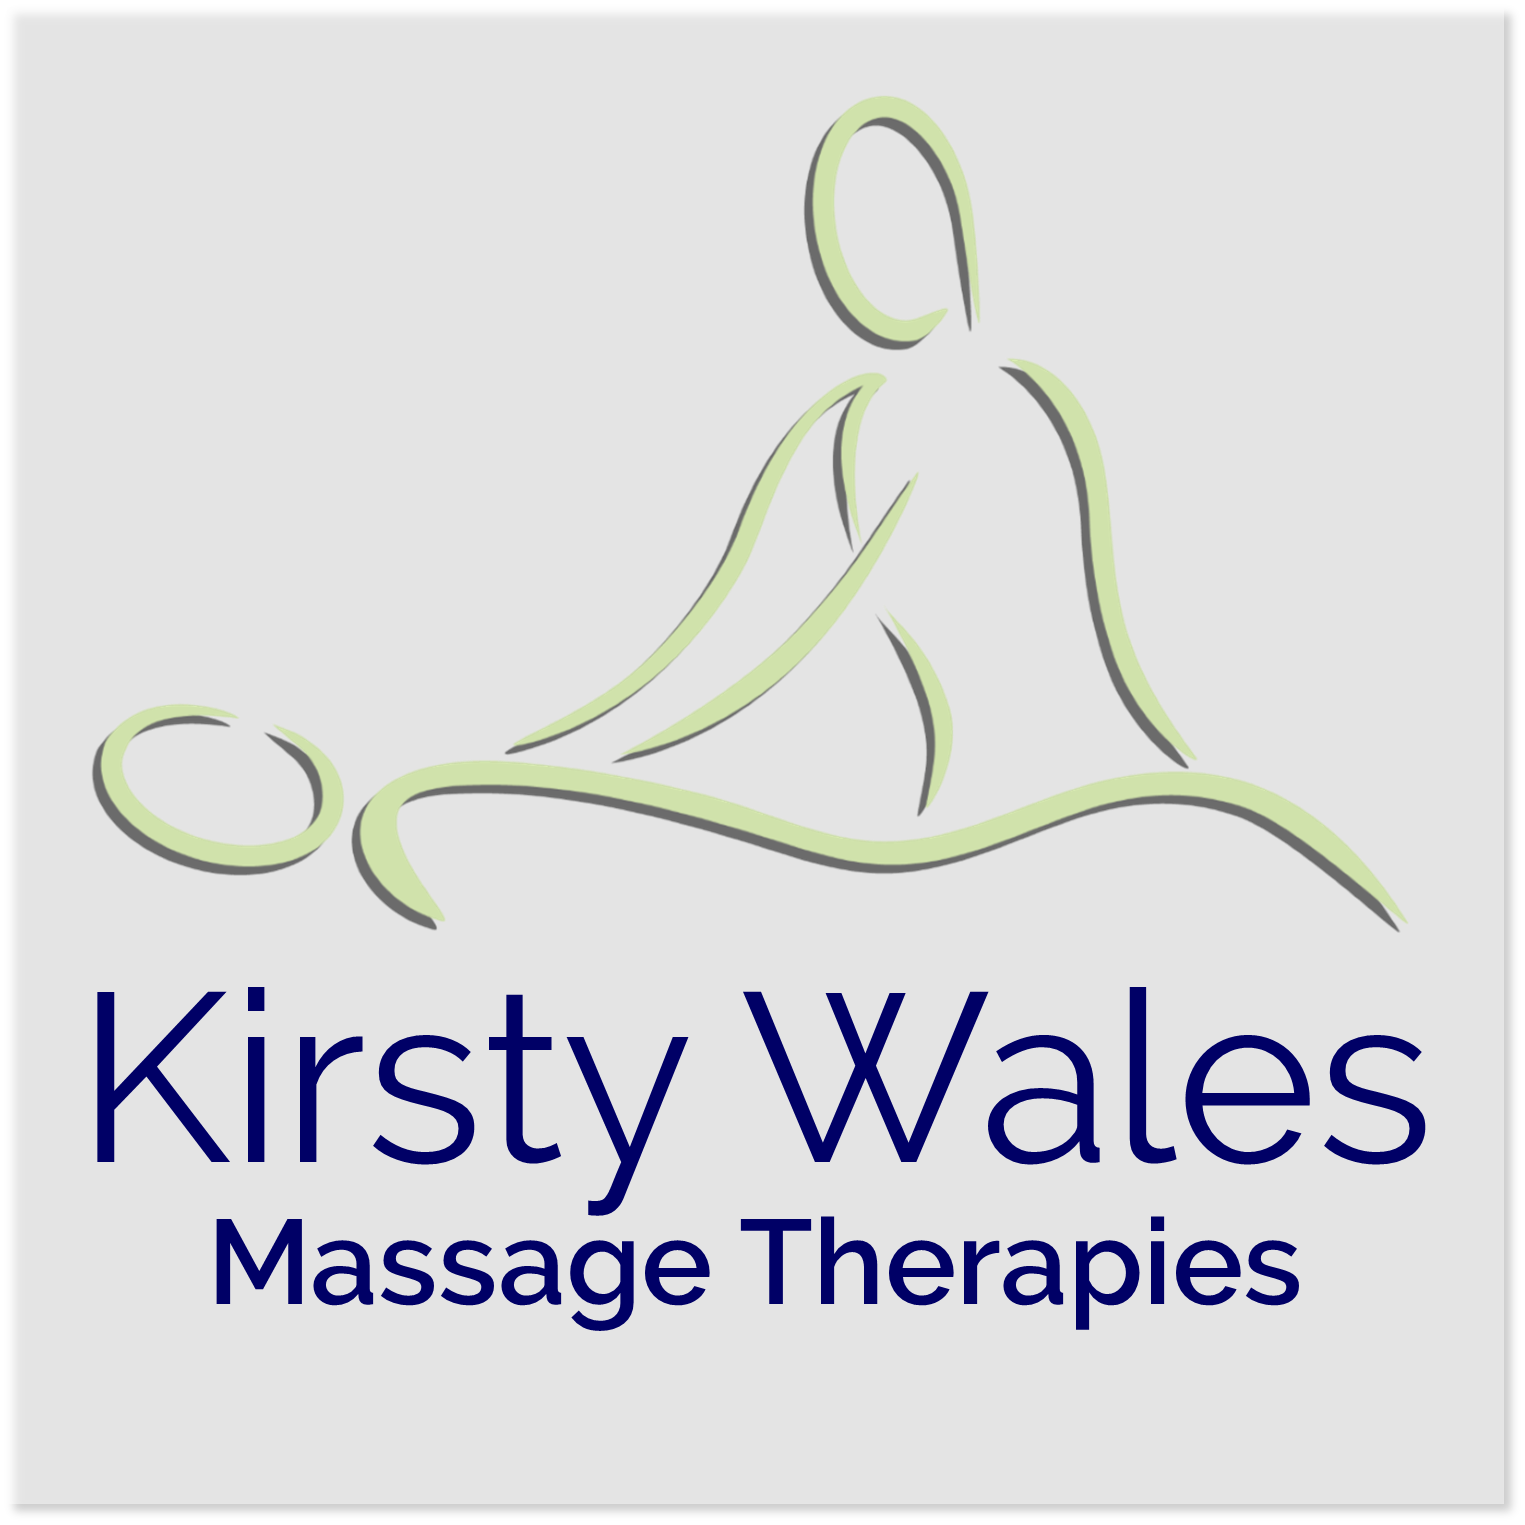 Kirsty Wales Mobile Massage Therapies.